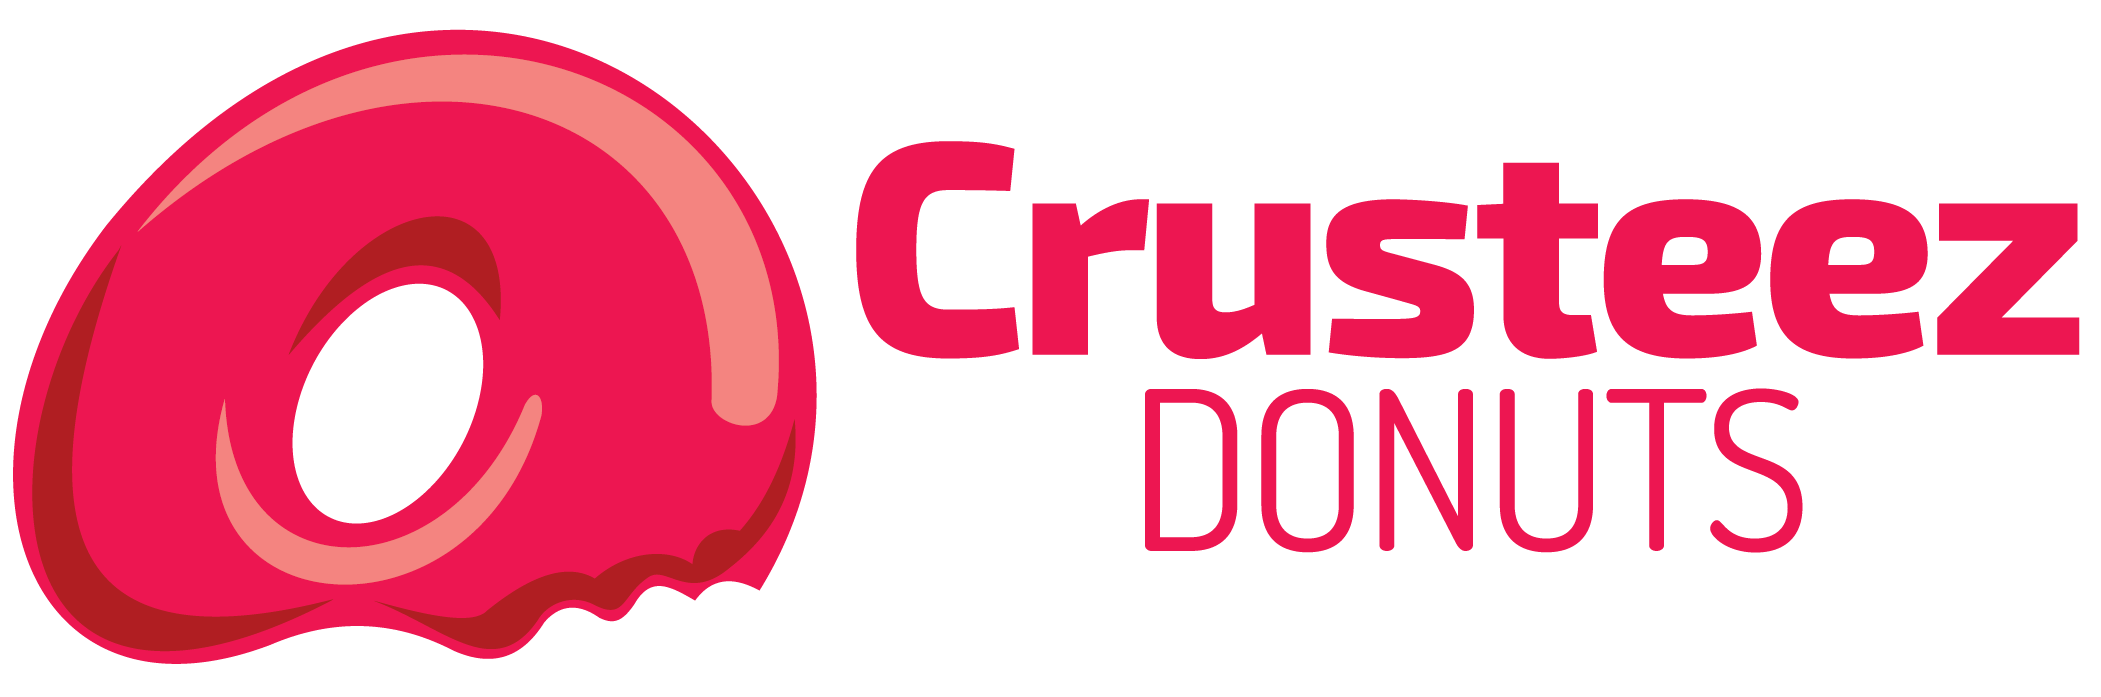 Our Donuts – Crusteez Donuts